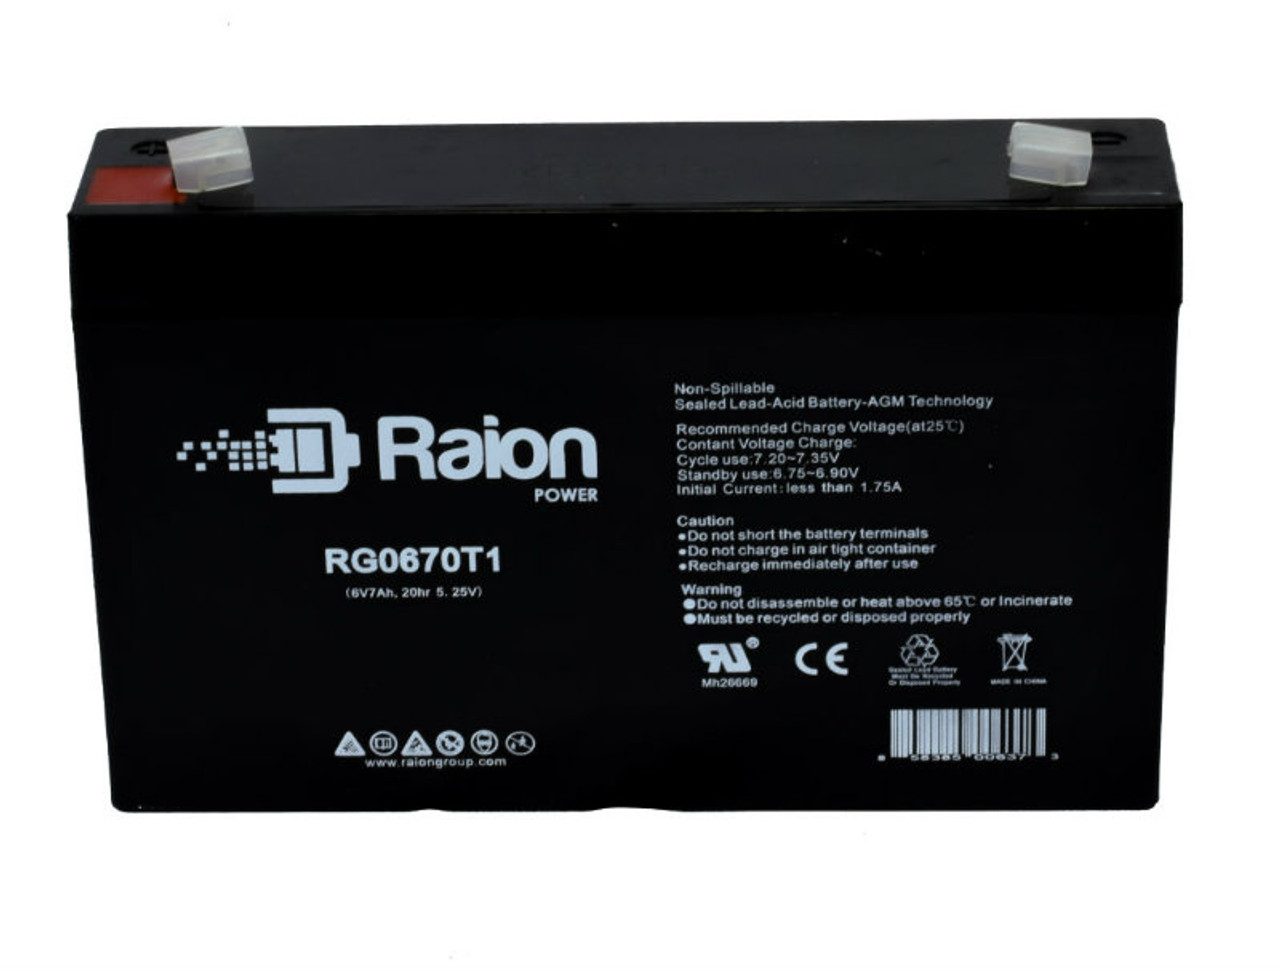 Raion Power RG0670T1 Replacement Battery Cartridge for McGaw 5138 Accu Pro Infusion Pump